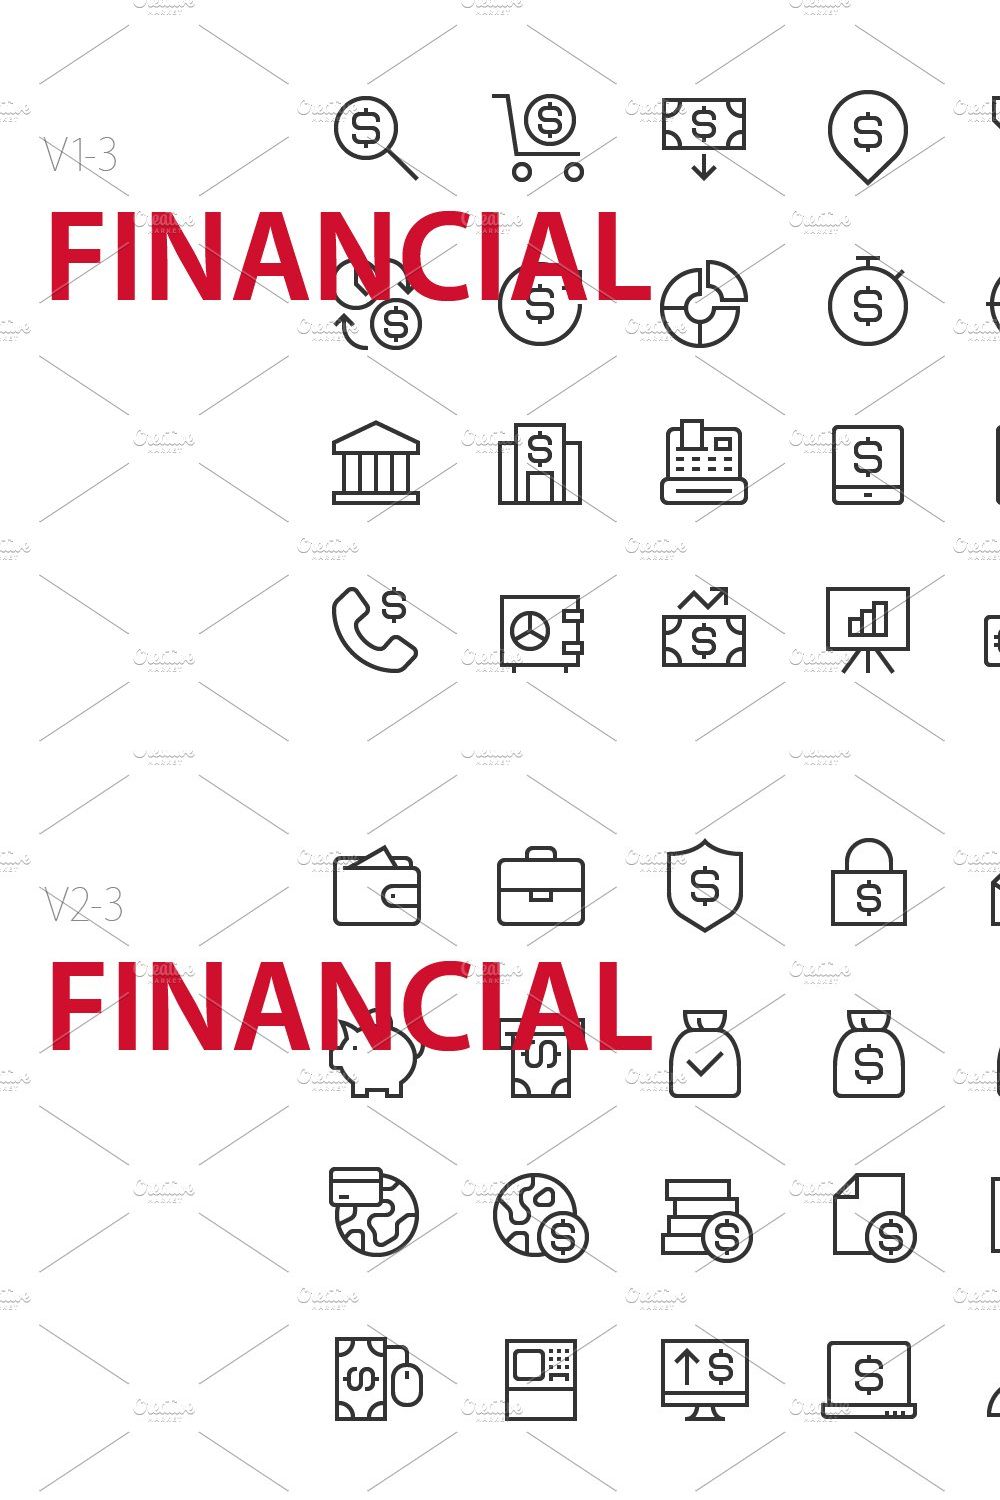 60 Financial UI icons pinterest preview image.